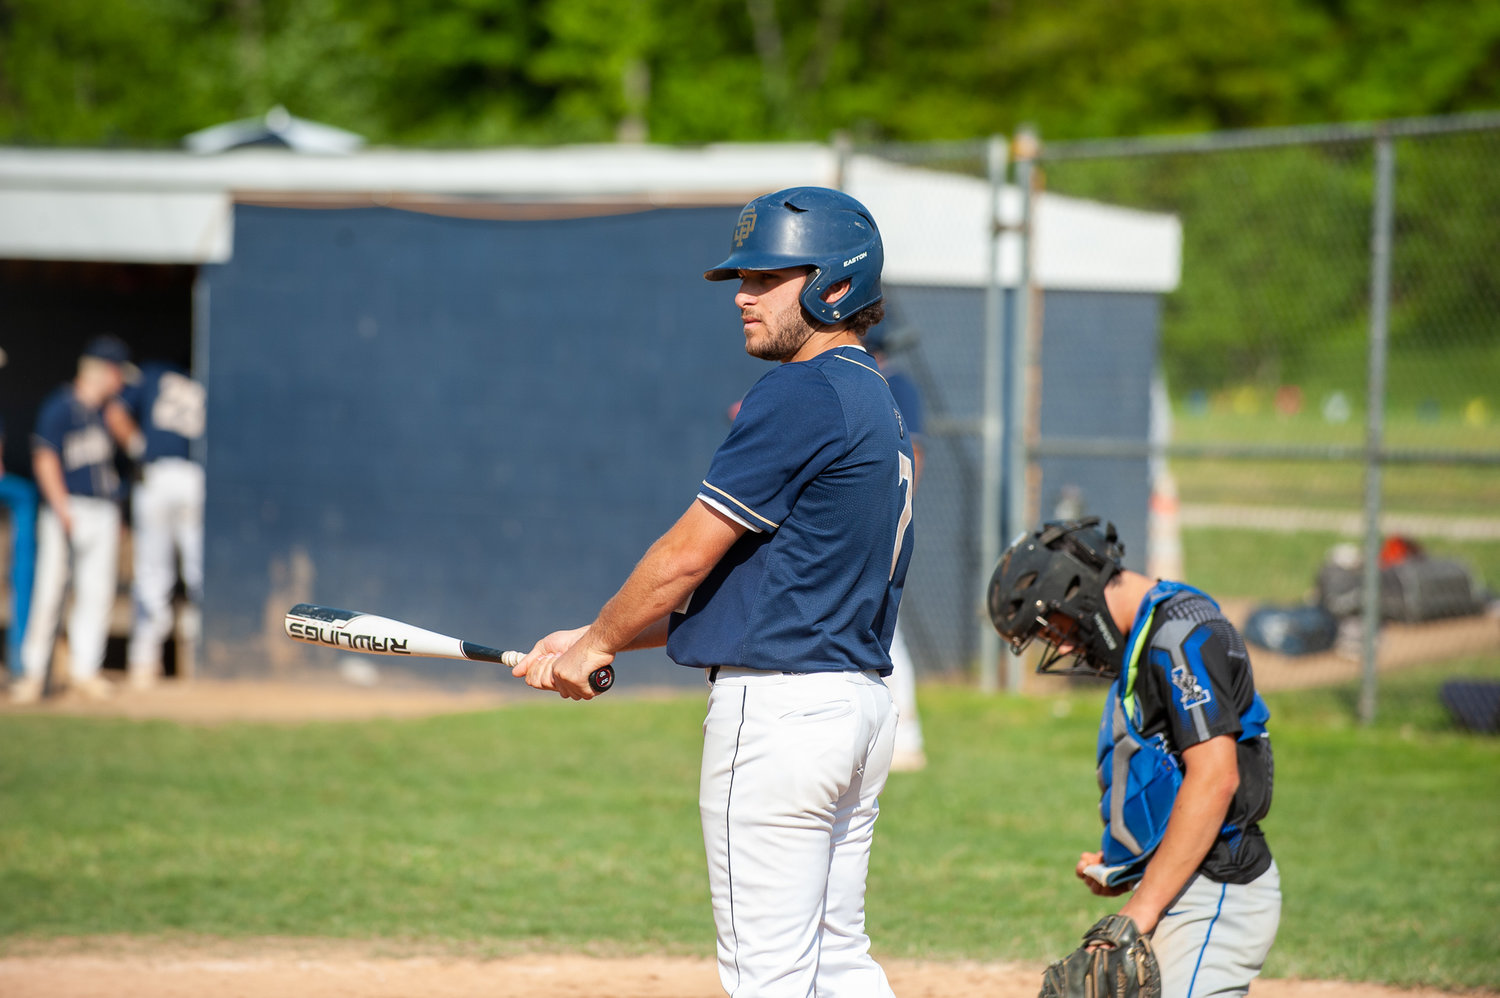 Luke Herz added a single in the fifth inning to keep Severna Park's rally going.